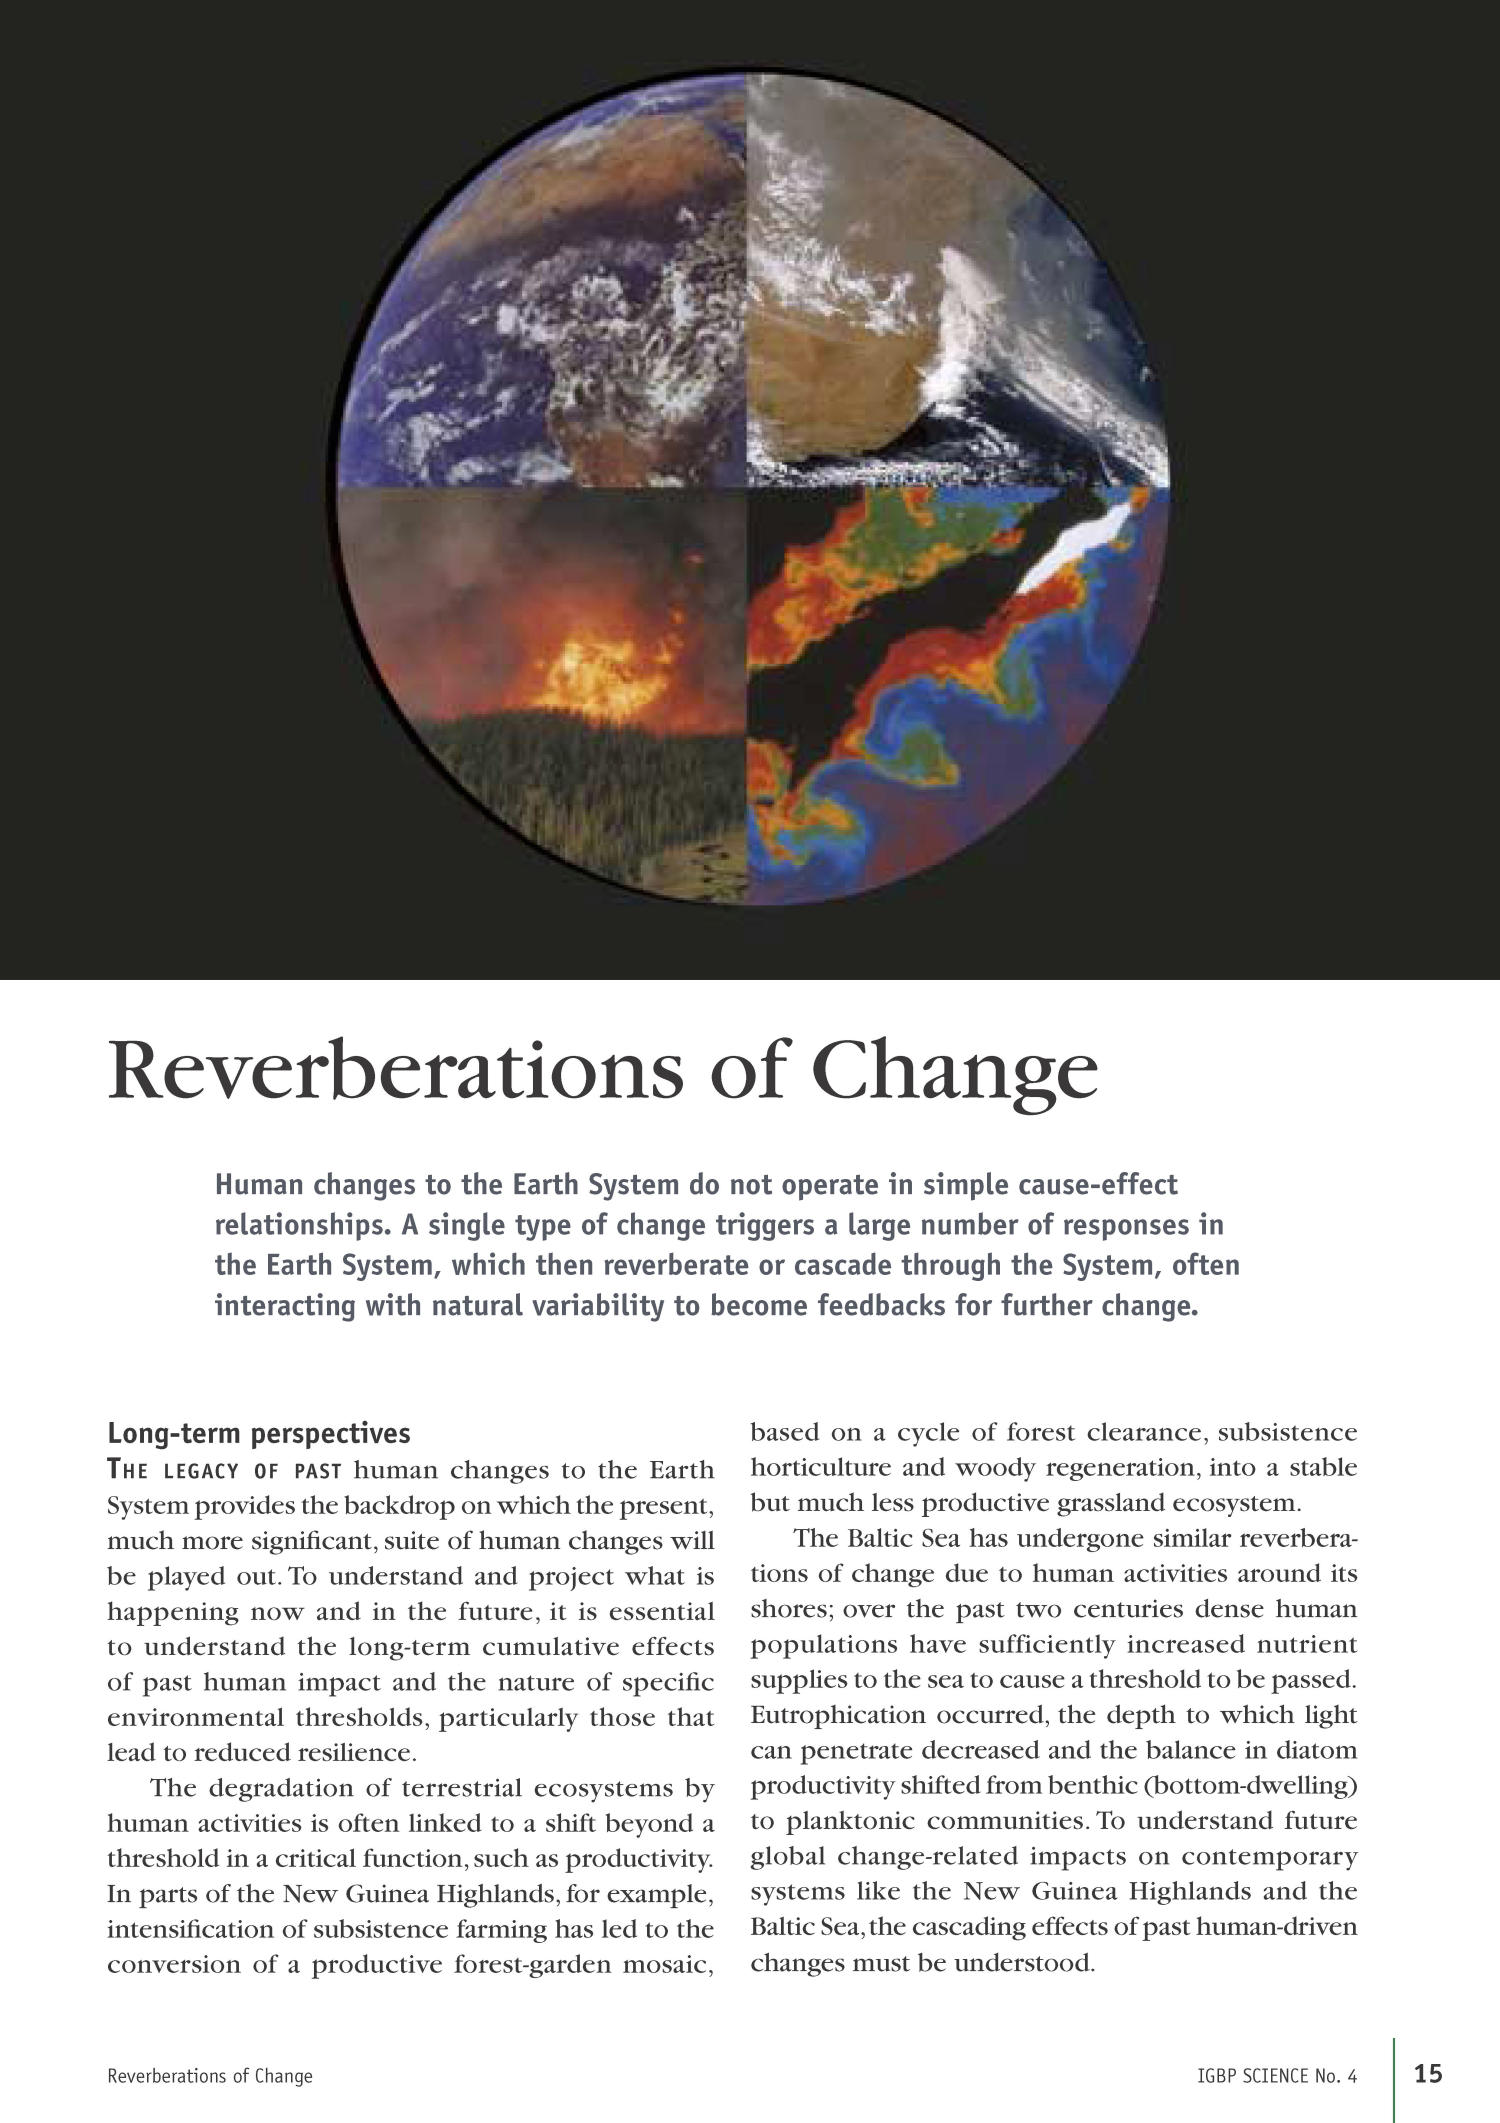 Global Change and the Earth System: A planet under pressure
                                                
                                                    15
                                                